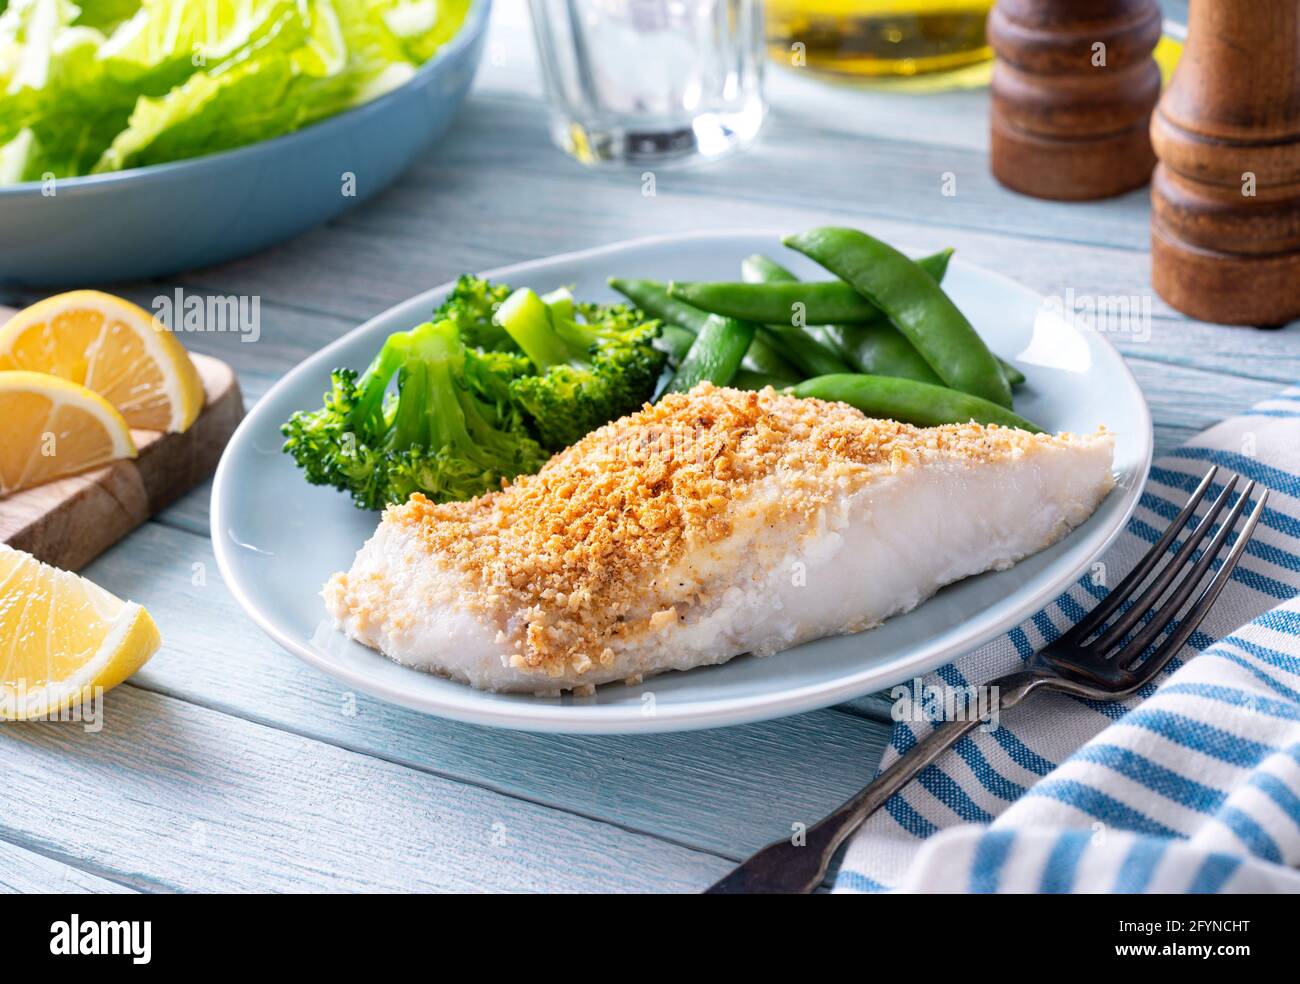 Delicious oven baked fish with a crumbled cracker crust. Stock Photo